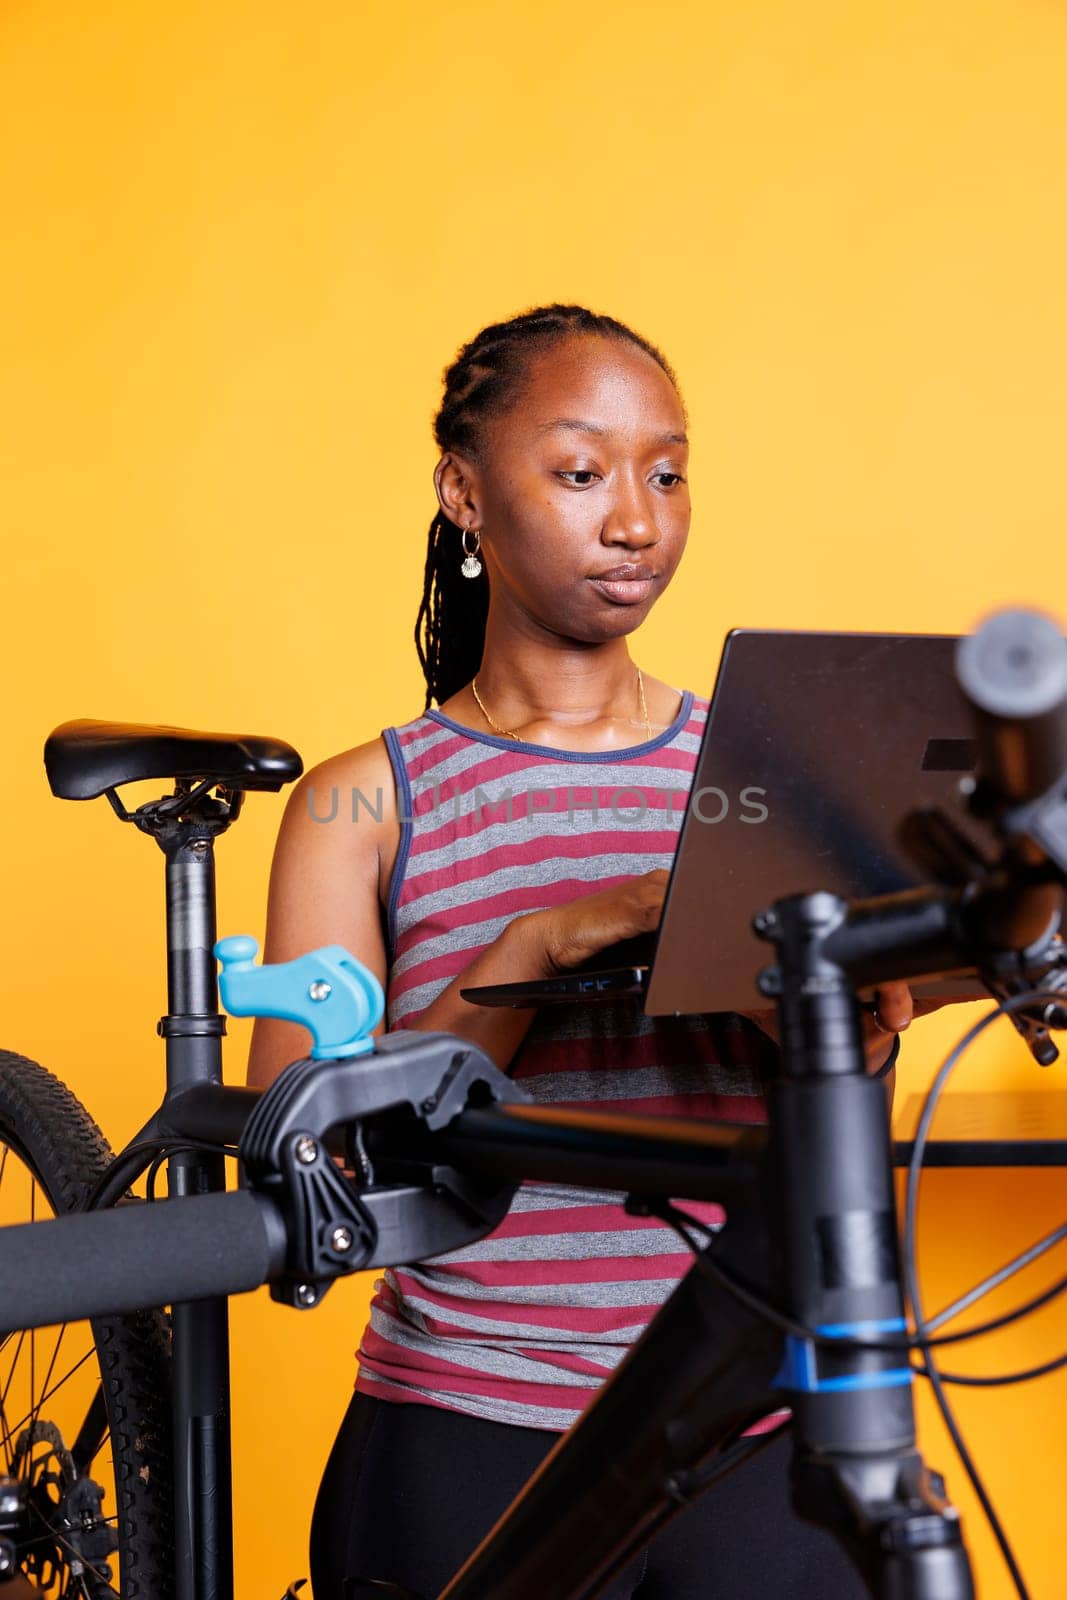 Woman uses technology to repair bicycle by DCStudio